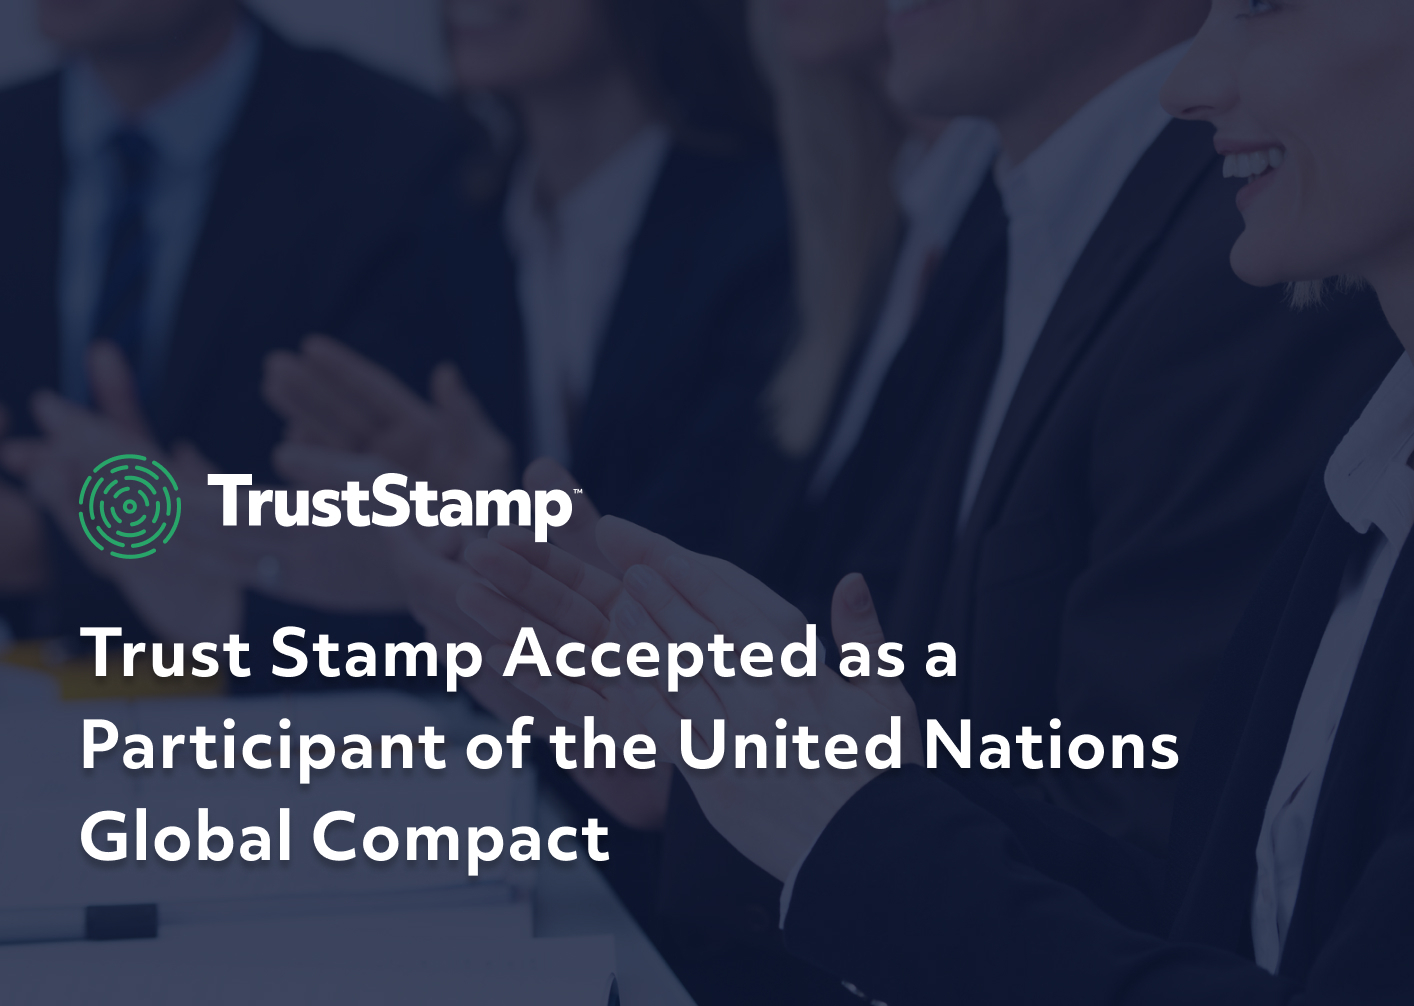 trust-stamp-has-been-accepted-as-a-participant-of-the-united-nations-global-compact